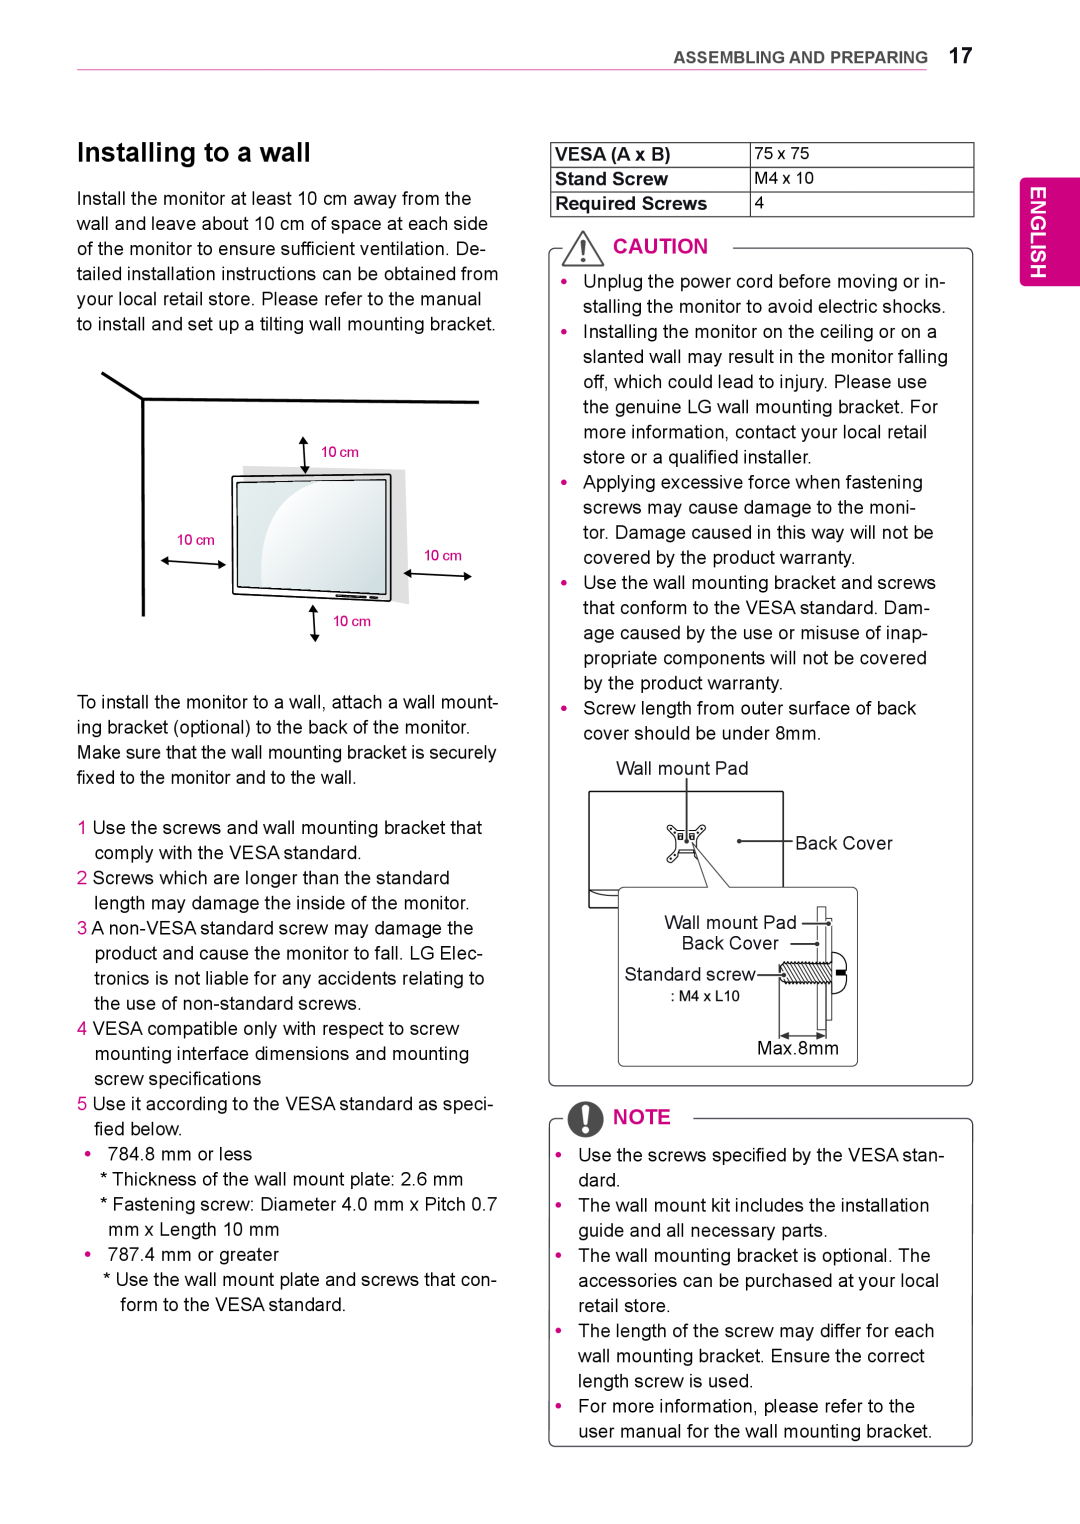 LG Electronics 29UM65, 29UB65 owner manual Installing to a wall, English, VESA A x B, Stand Screw, Required Screws 